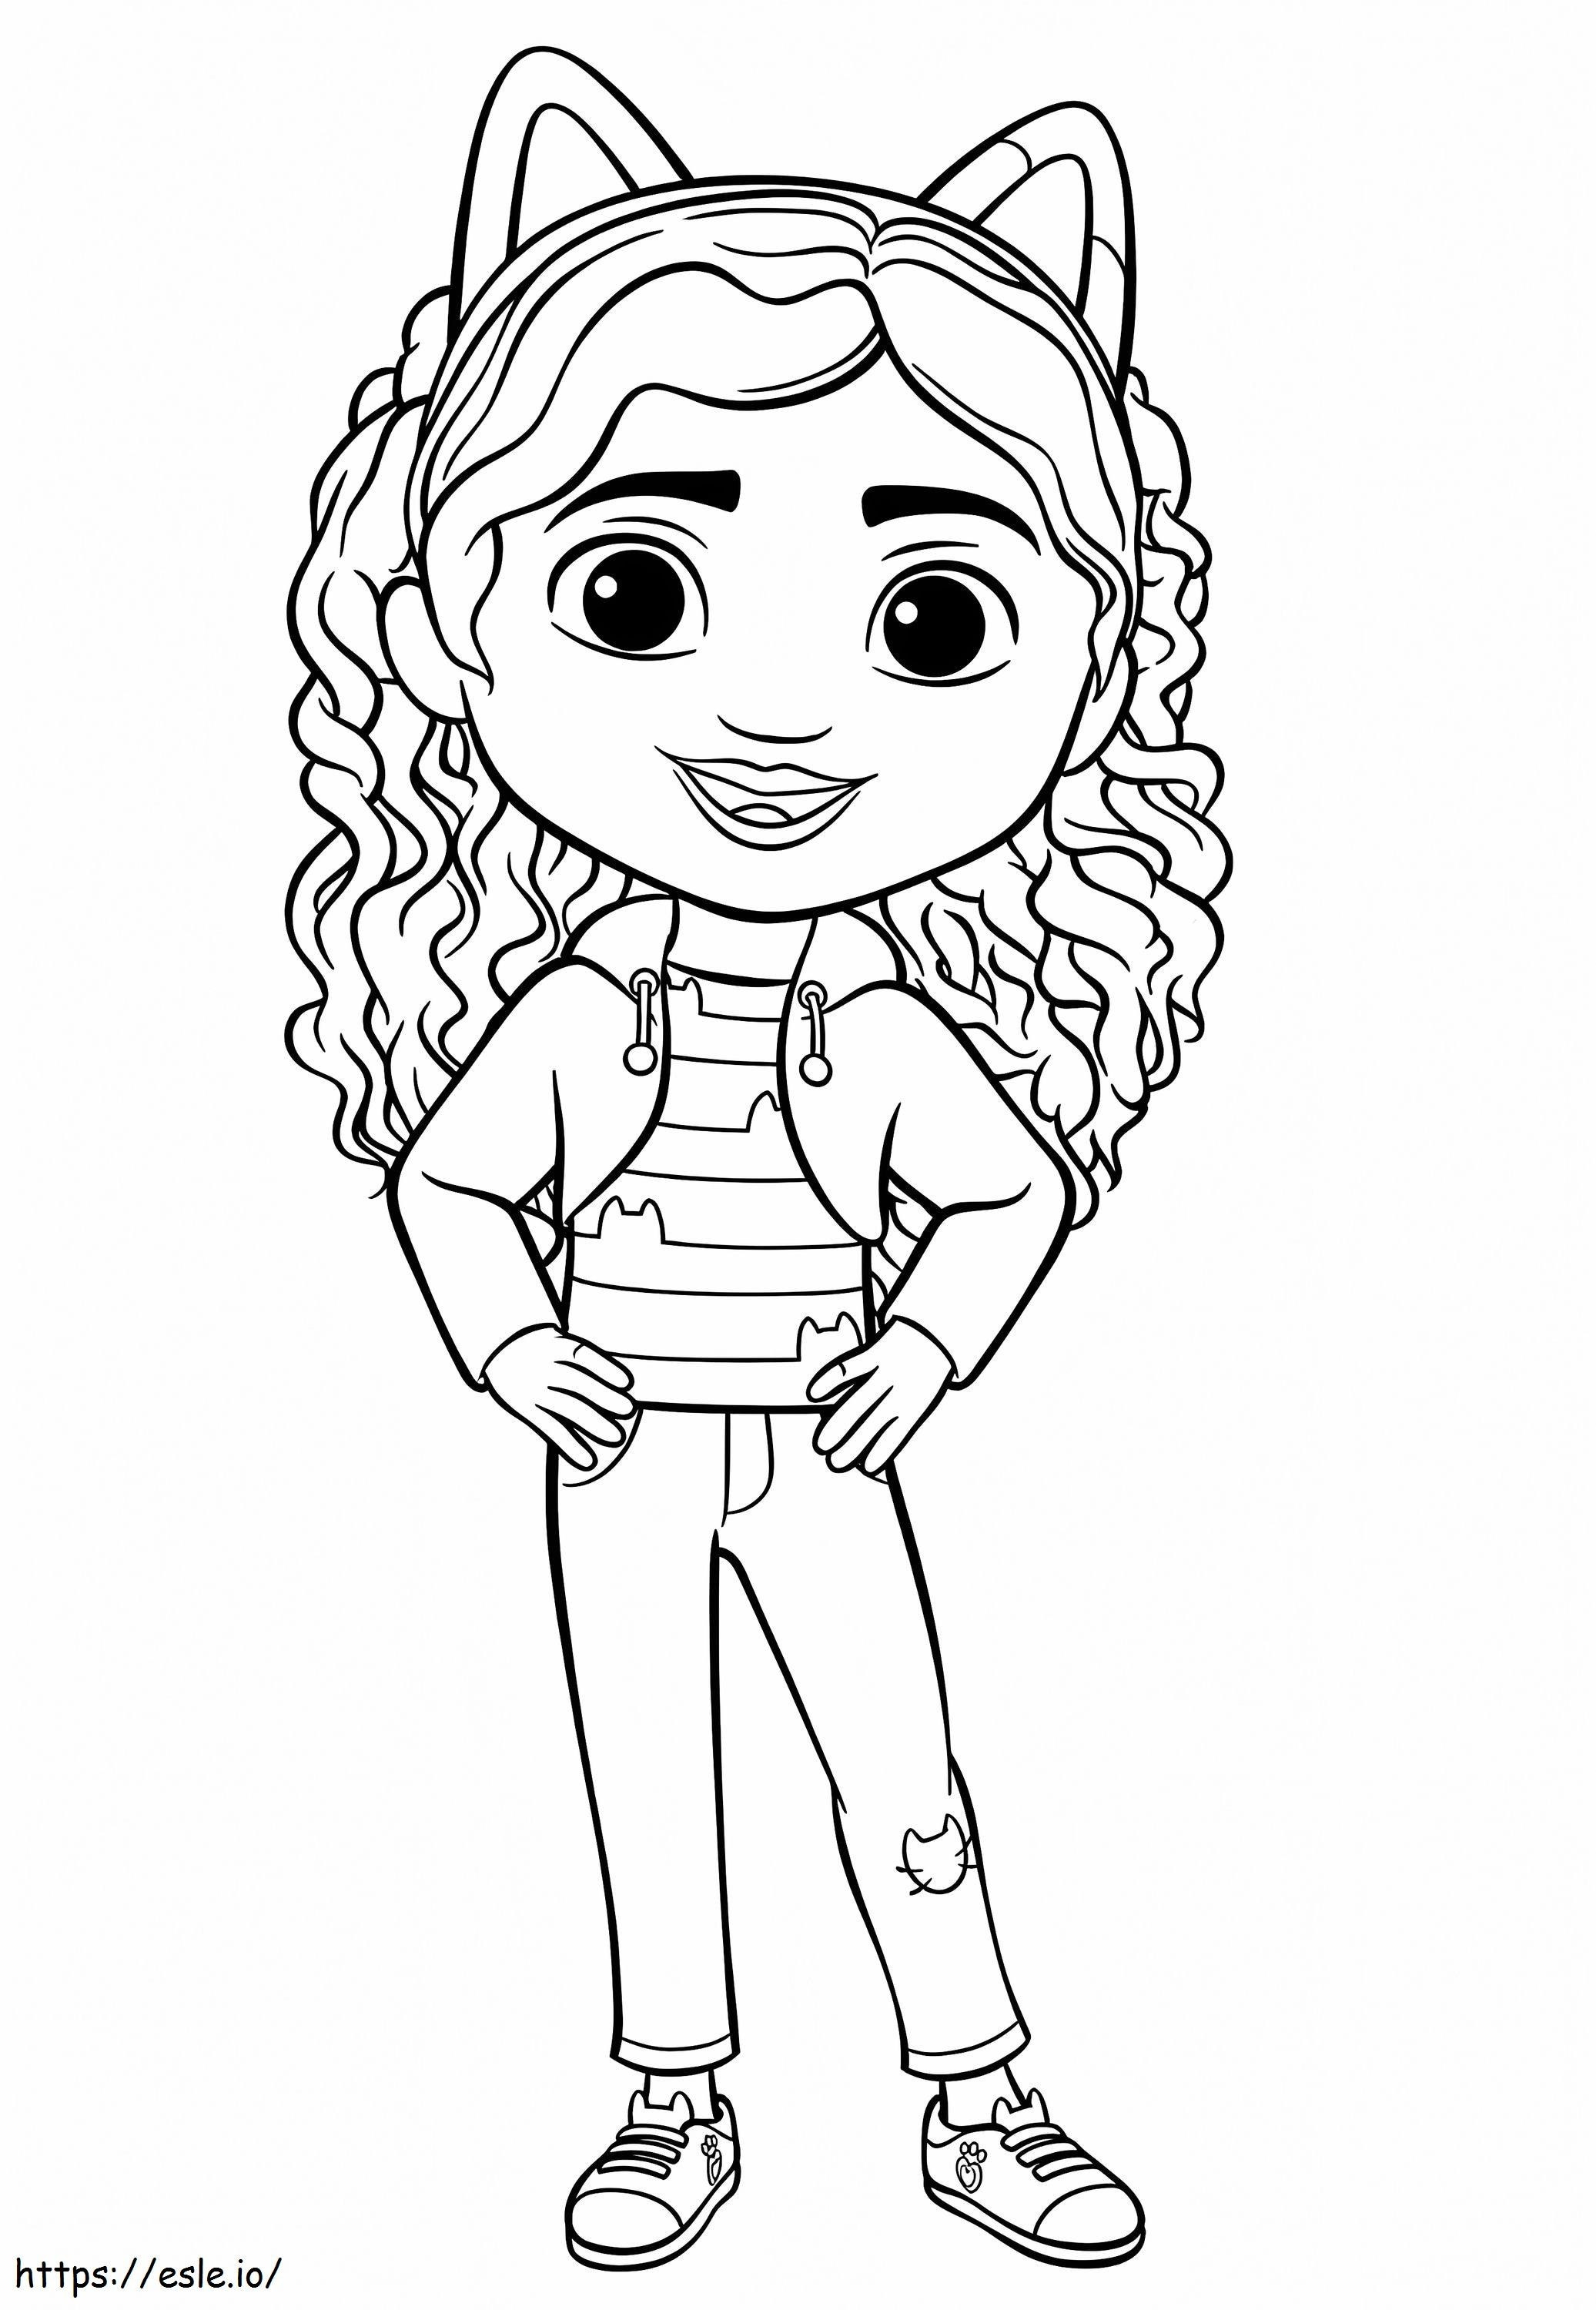 Happy Gabby coloring page